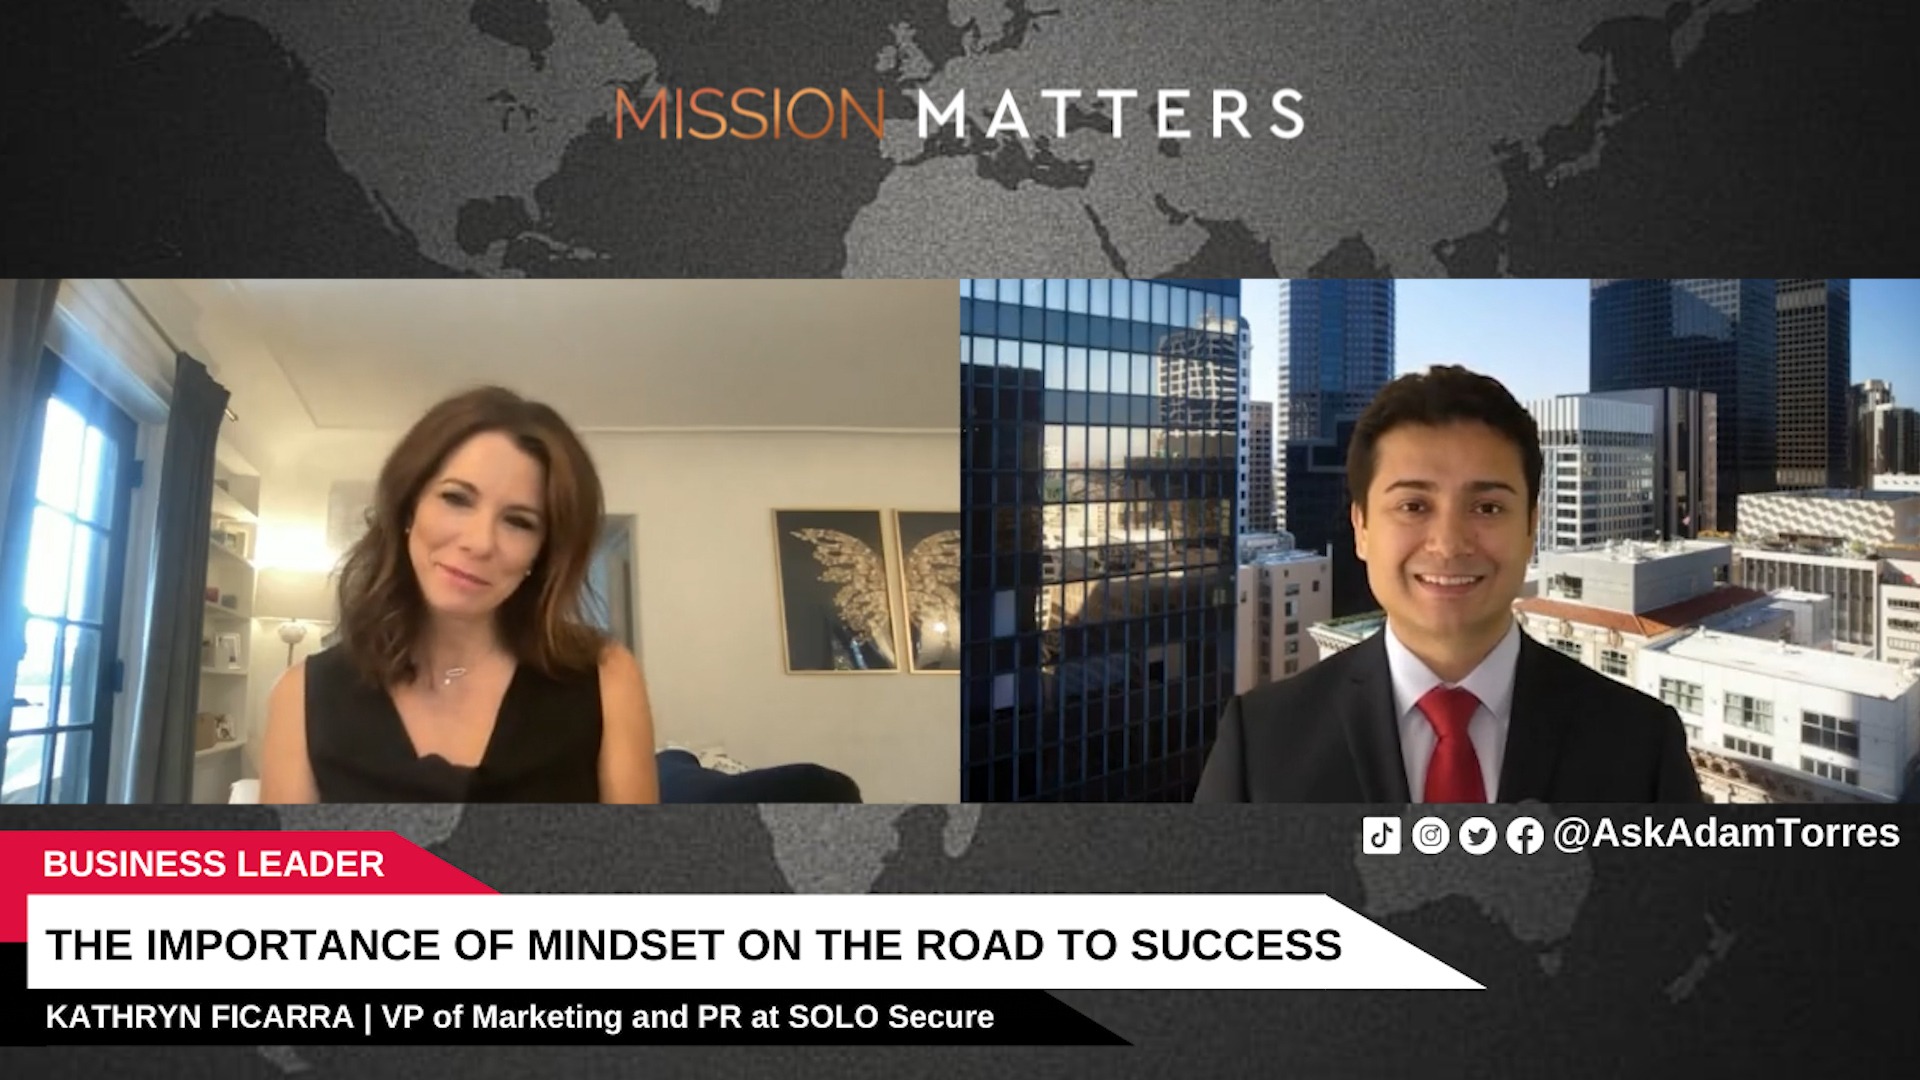 The Importance of Mindset on the Road to Success - Mission Matters